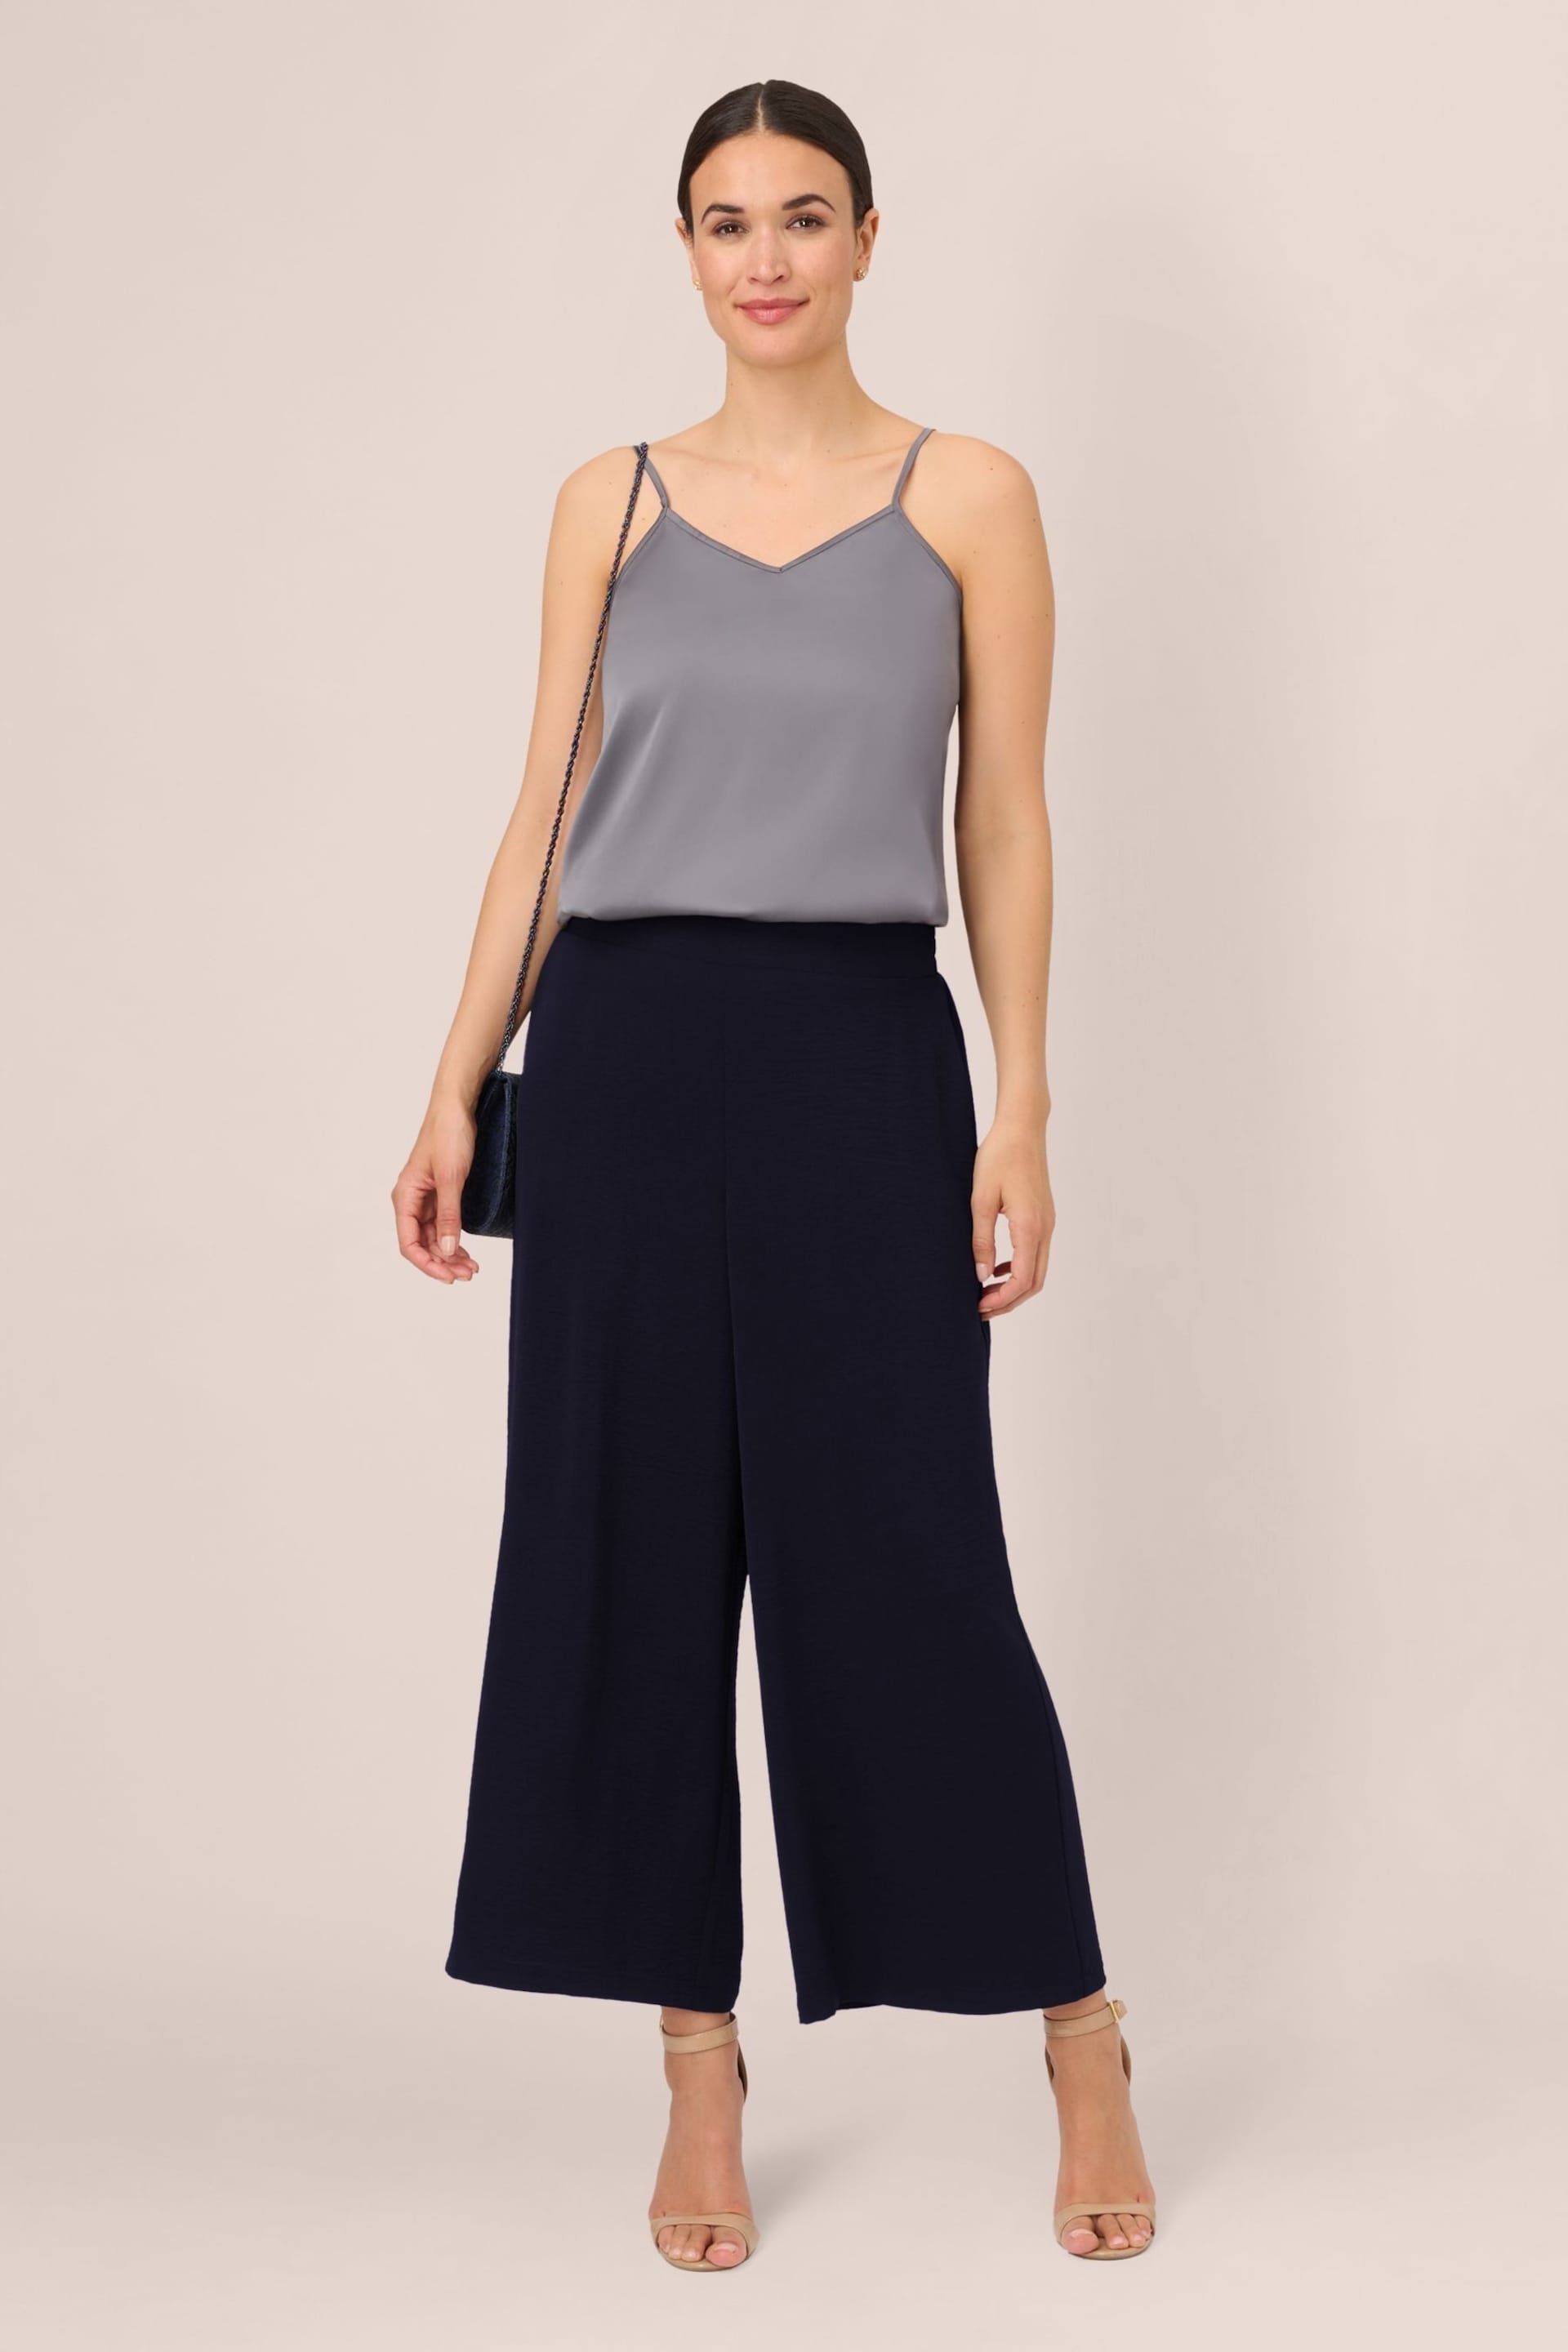 Adrianna Papell Blue Textured Satin Pull On Trousers - Image 3 of 6